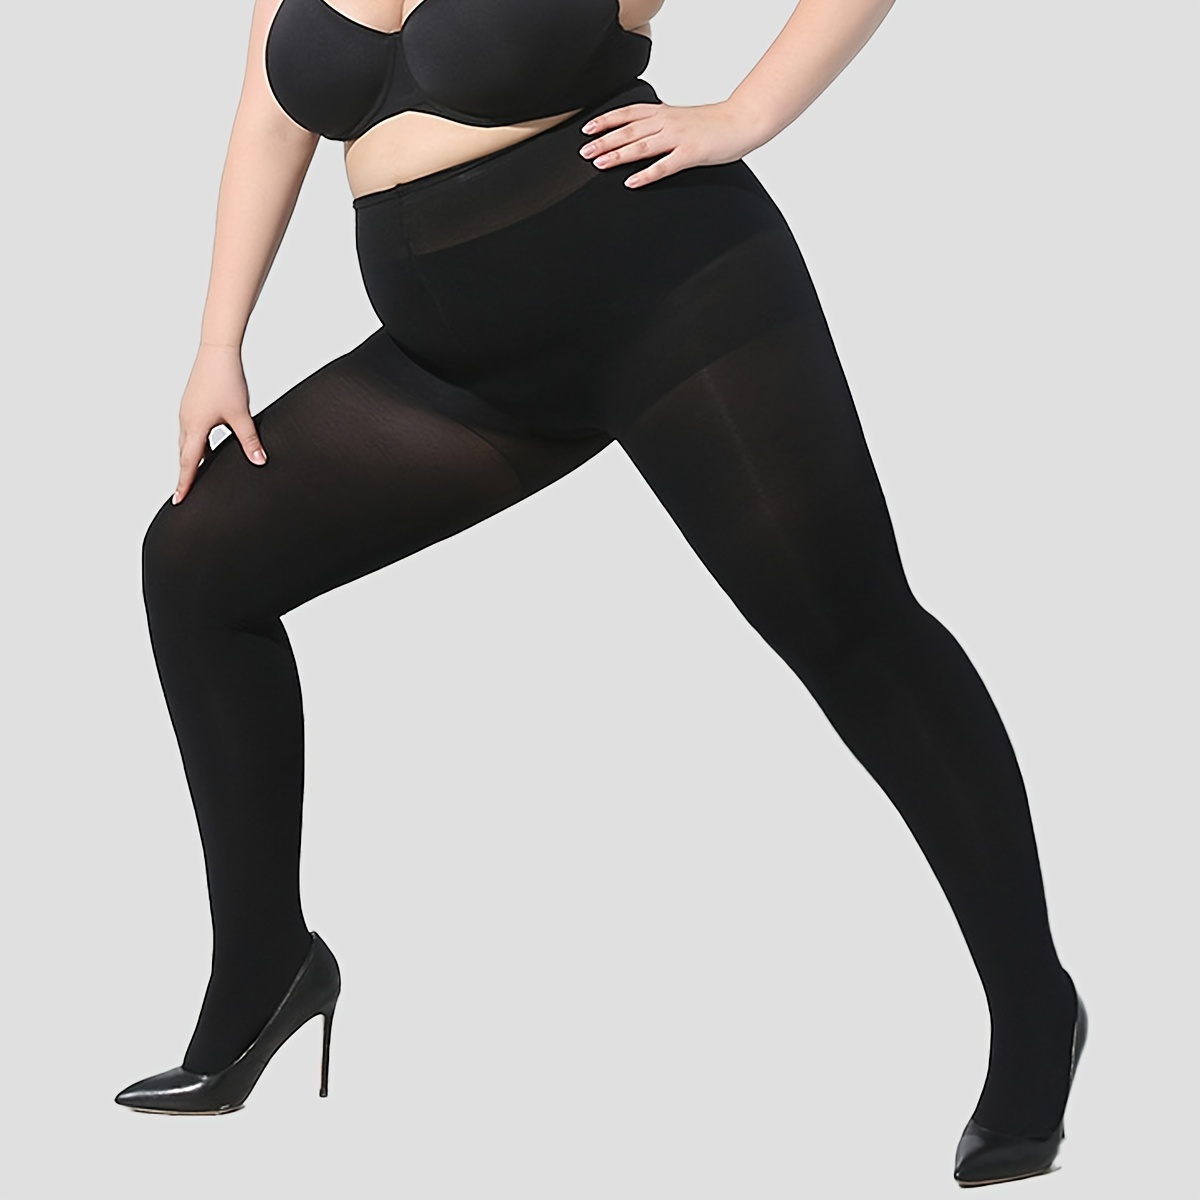 Pomapoma Women's Plus Size Thermal Tights - 500g